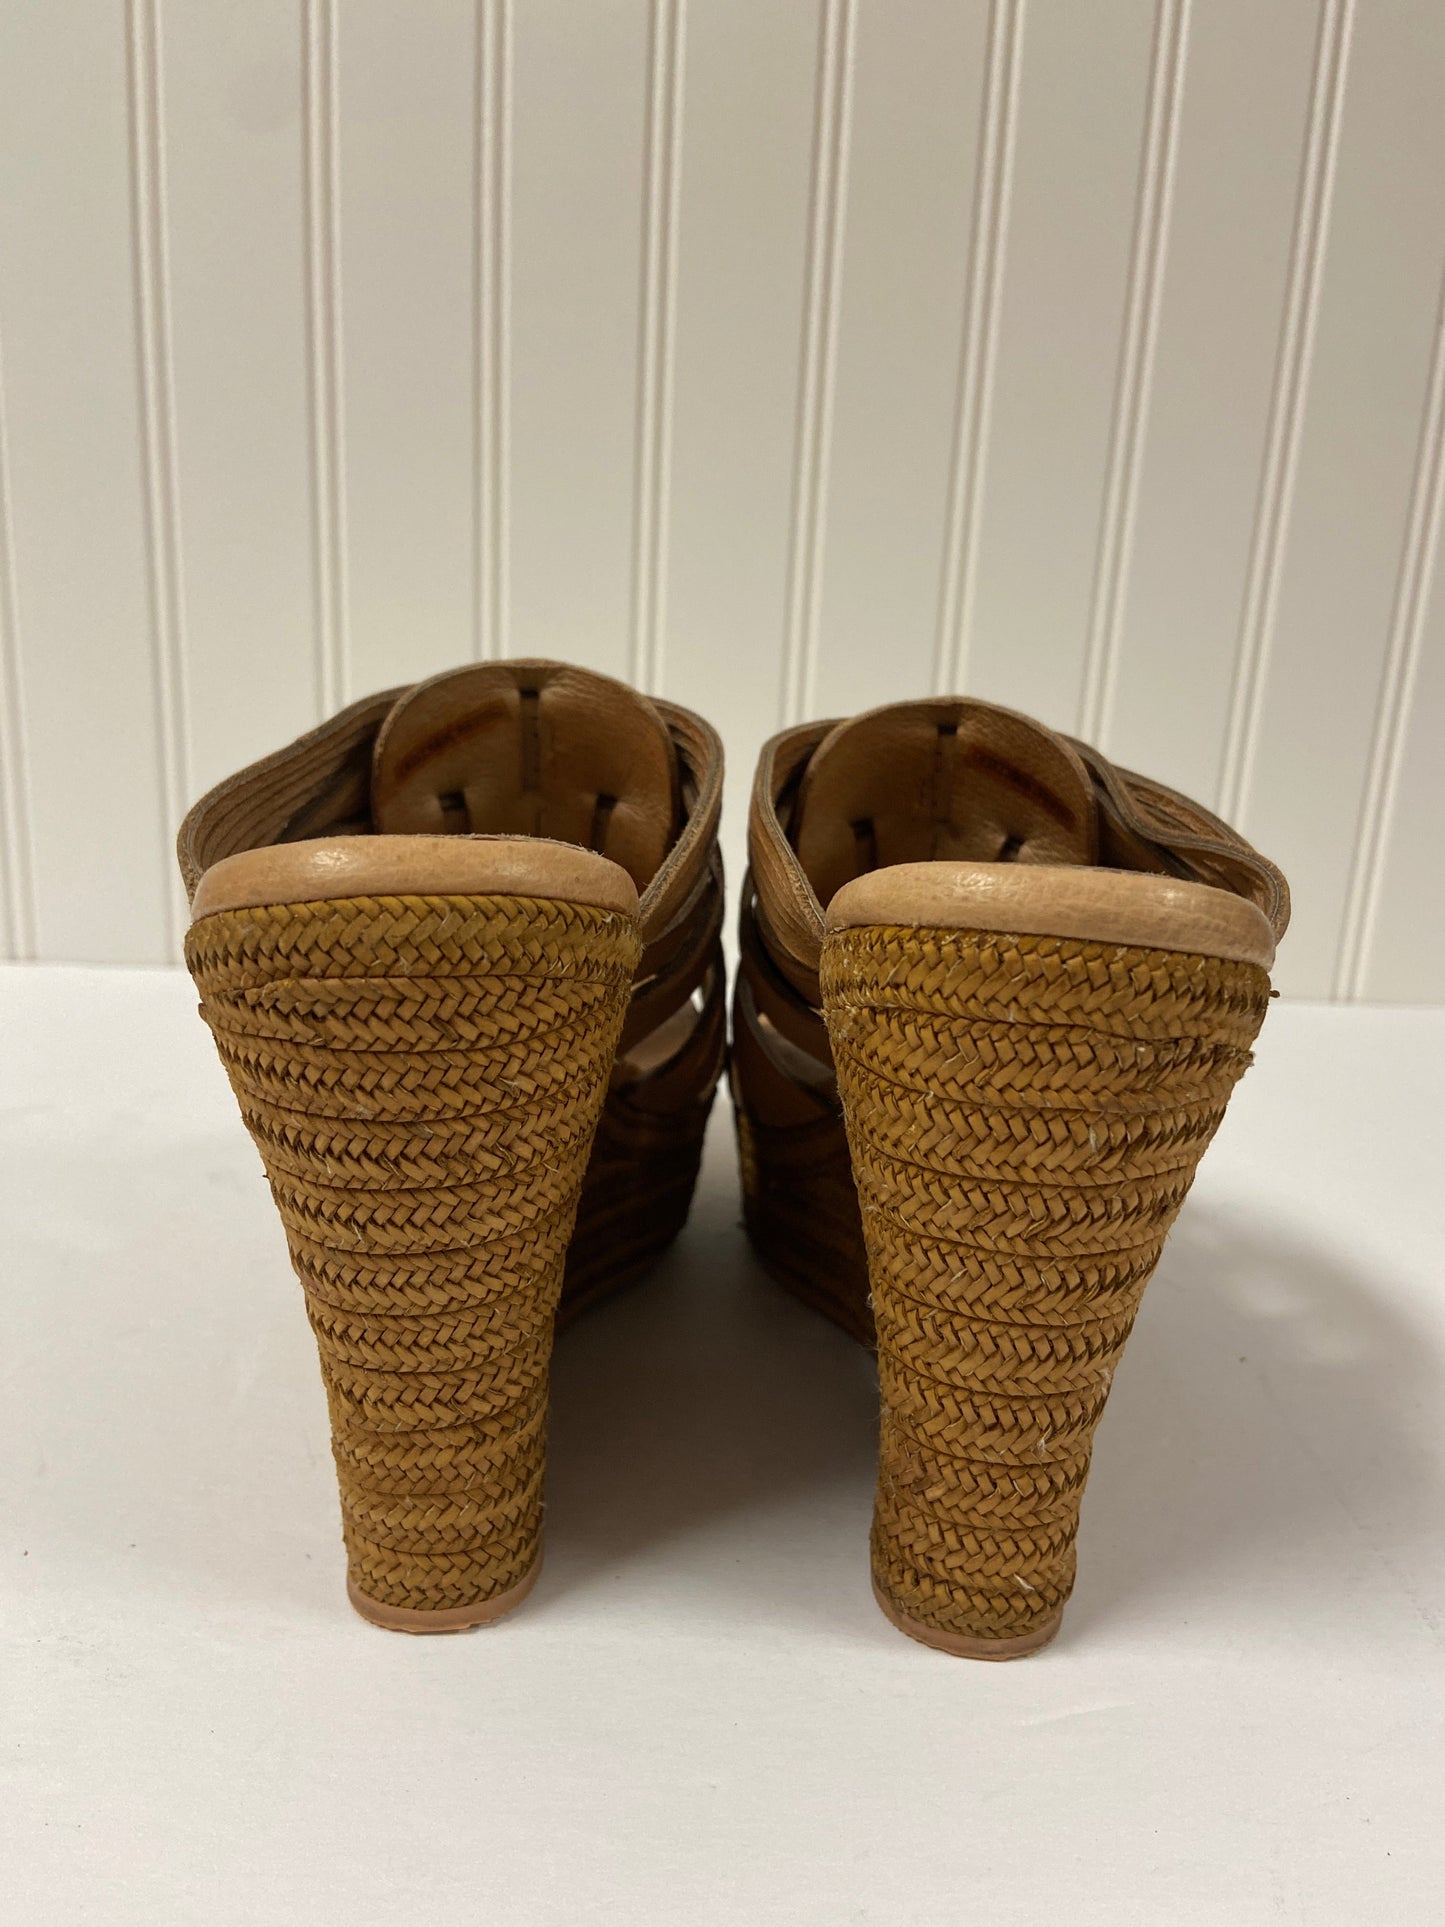 Sandals Heels Wedge By Ugg  Size: 5.5